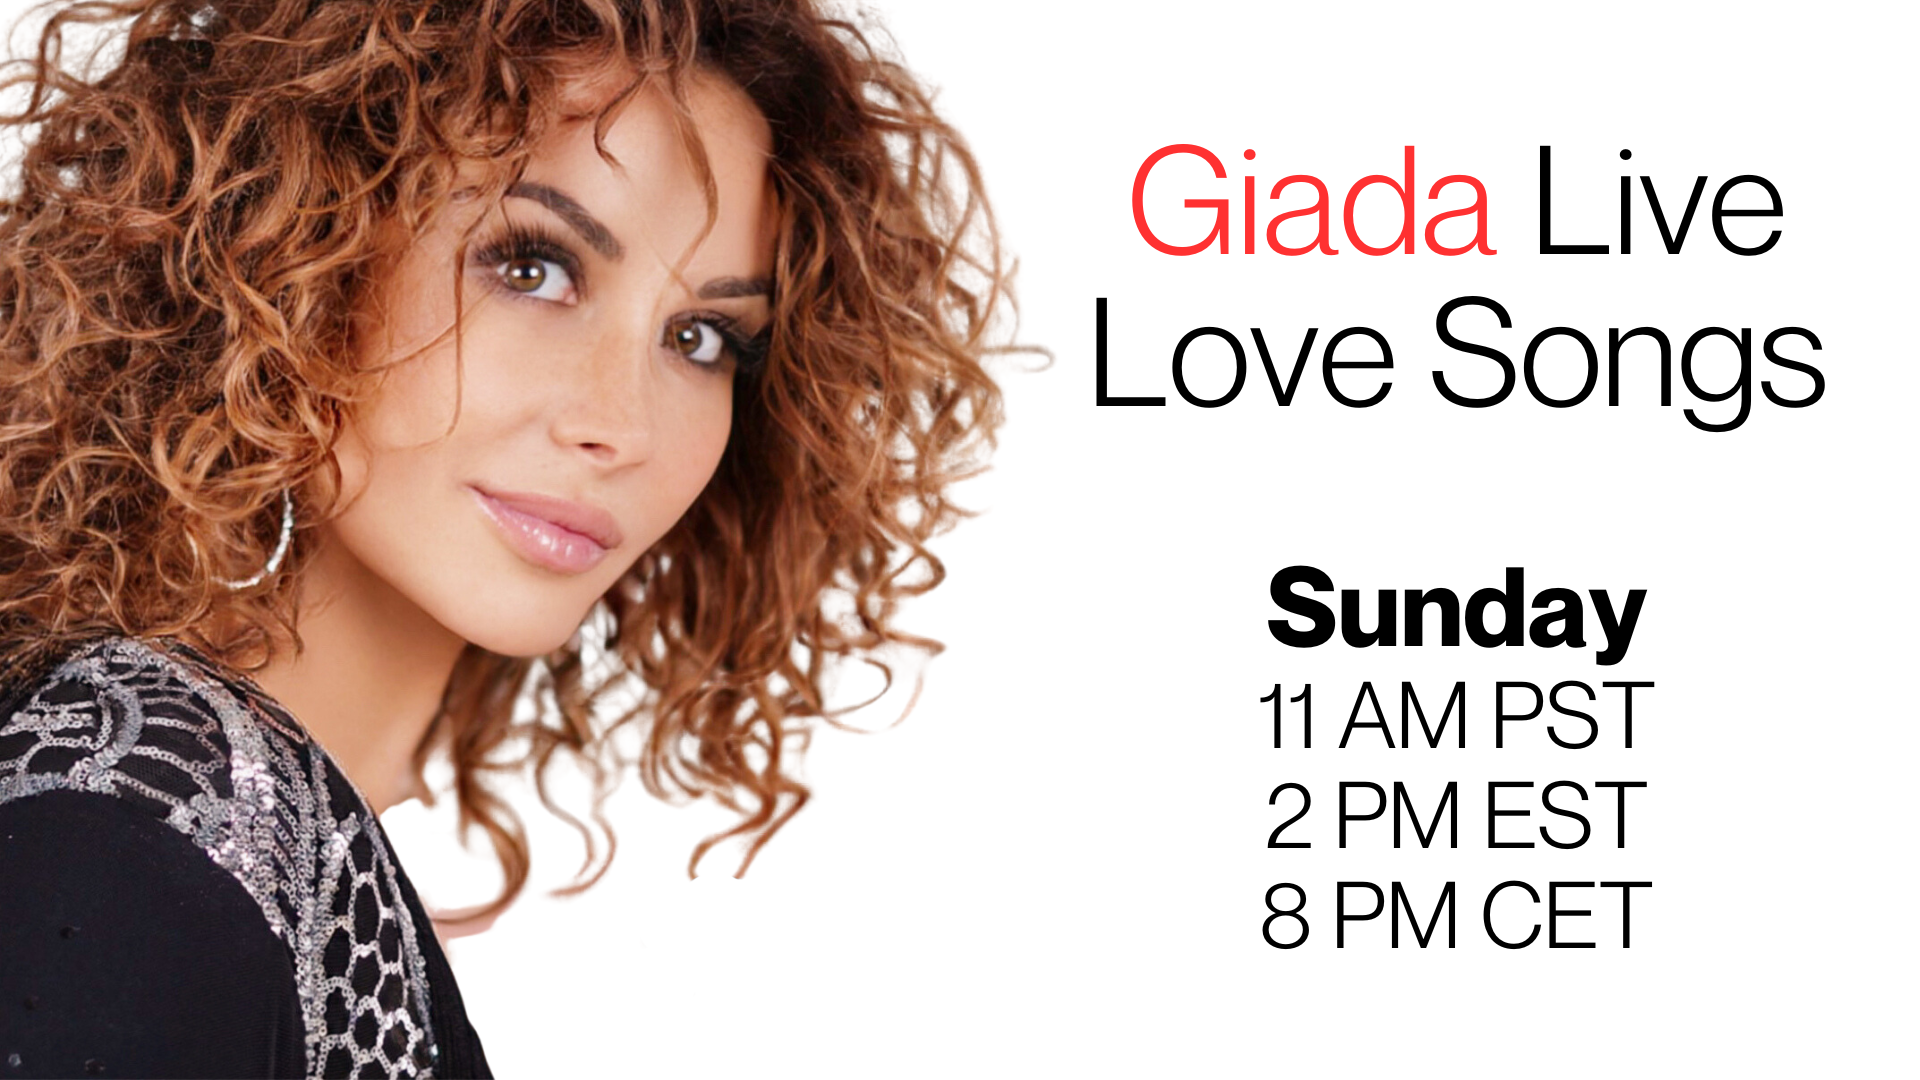 Giada Live Love Songs event cover photo